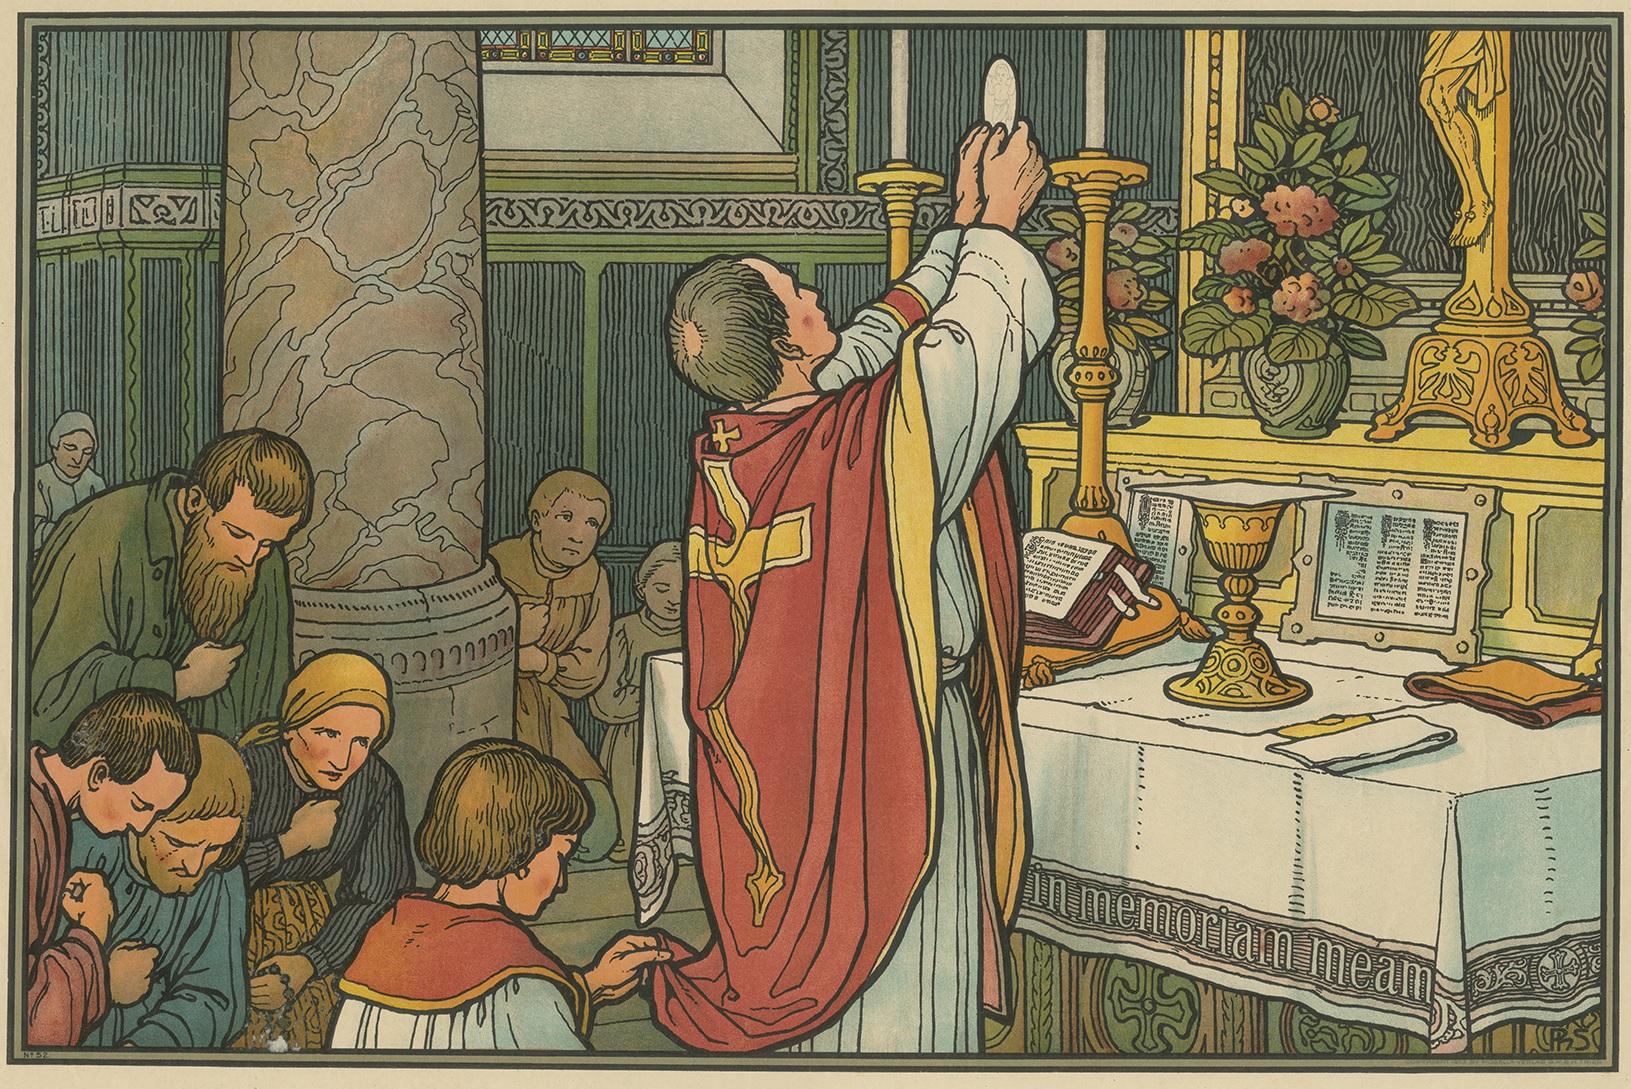 Large antique print of the seven sacraments. Published by Mosella-Verlag, 1913. This print originates from a series titled 'Kathol. Schulbibelwerk von Dr. Ecker'.